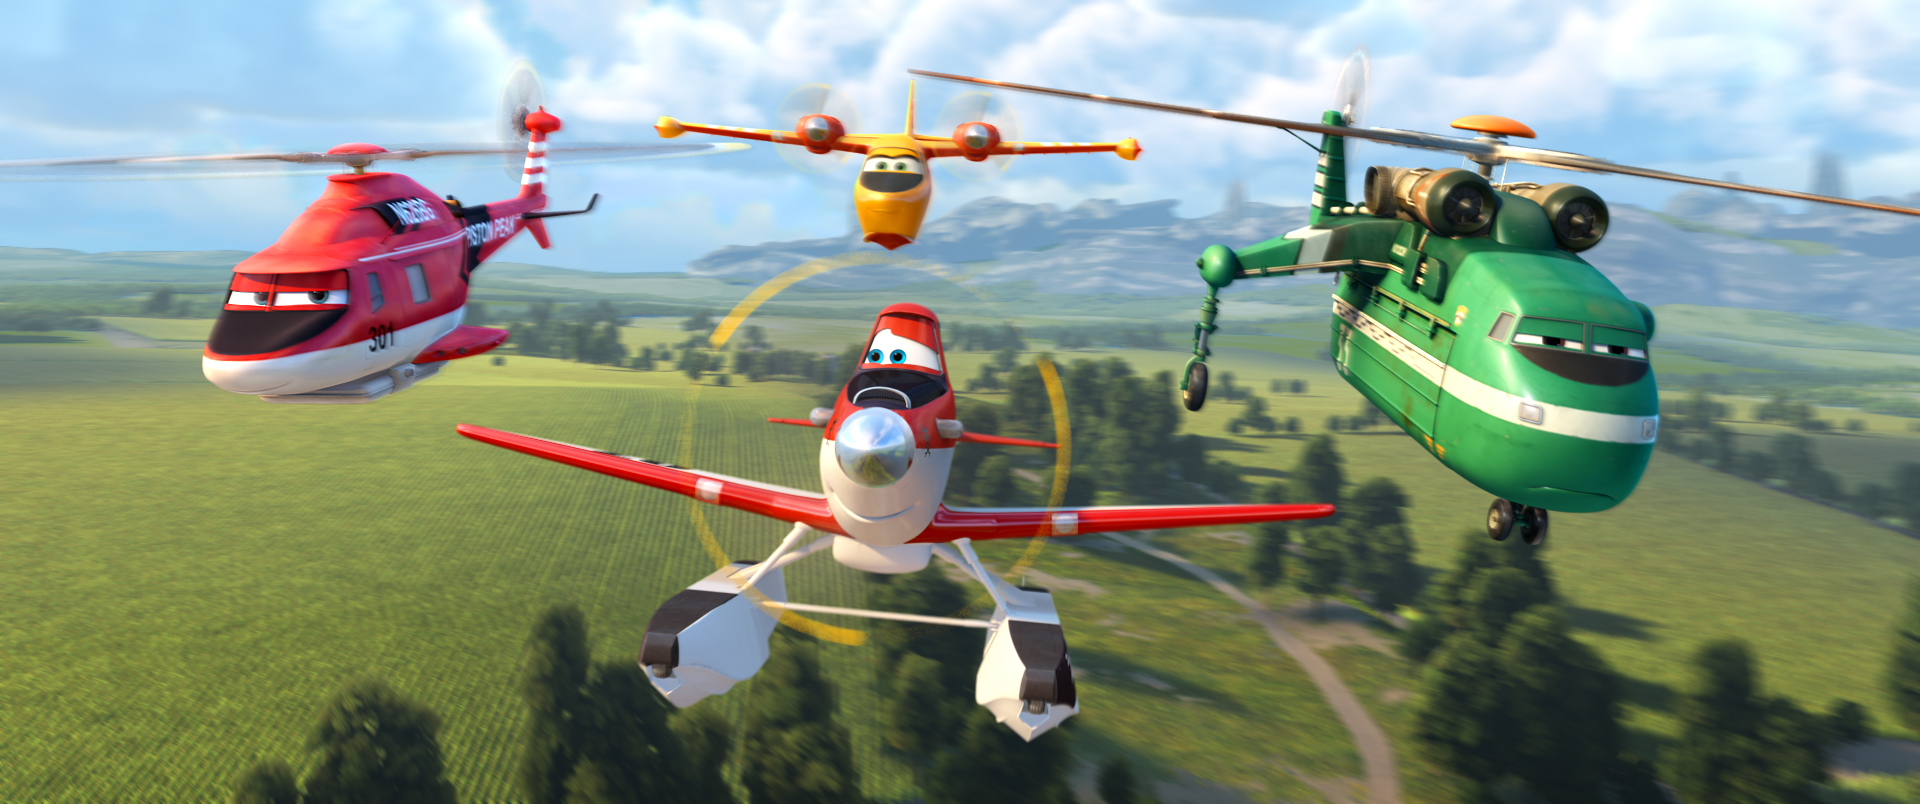 Movie Review: Planes: Fire & Rescue